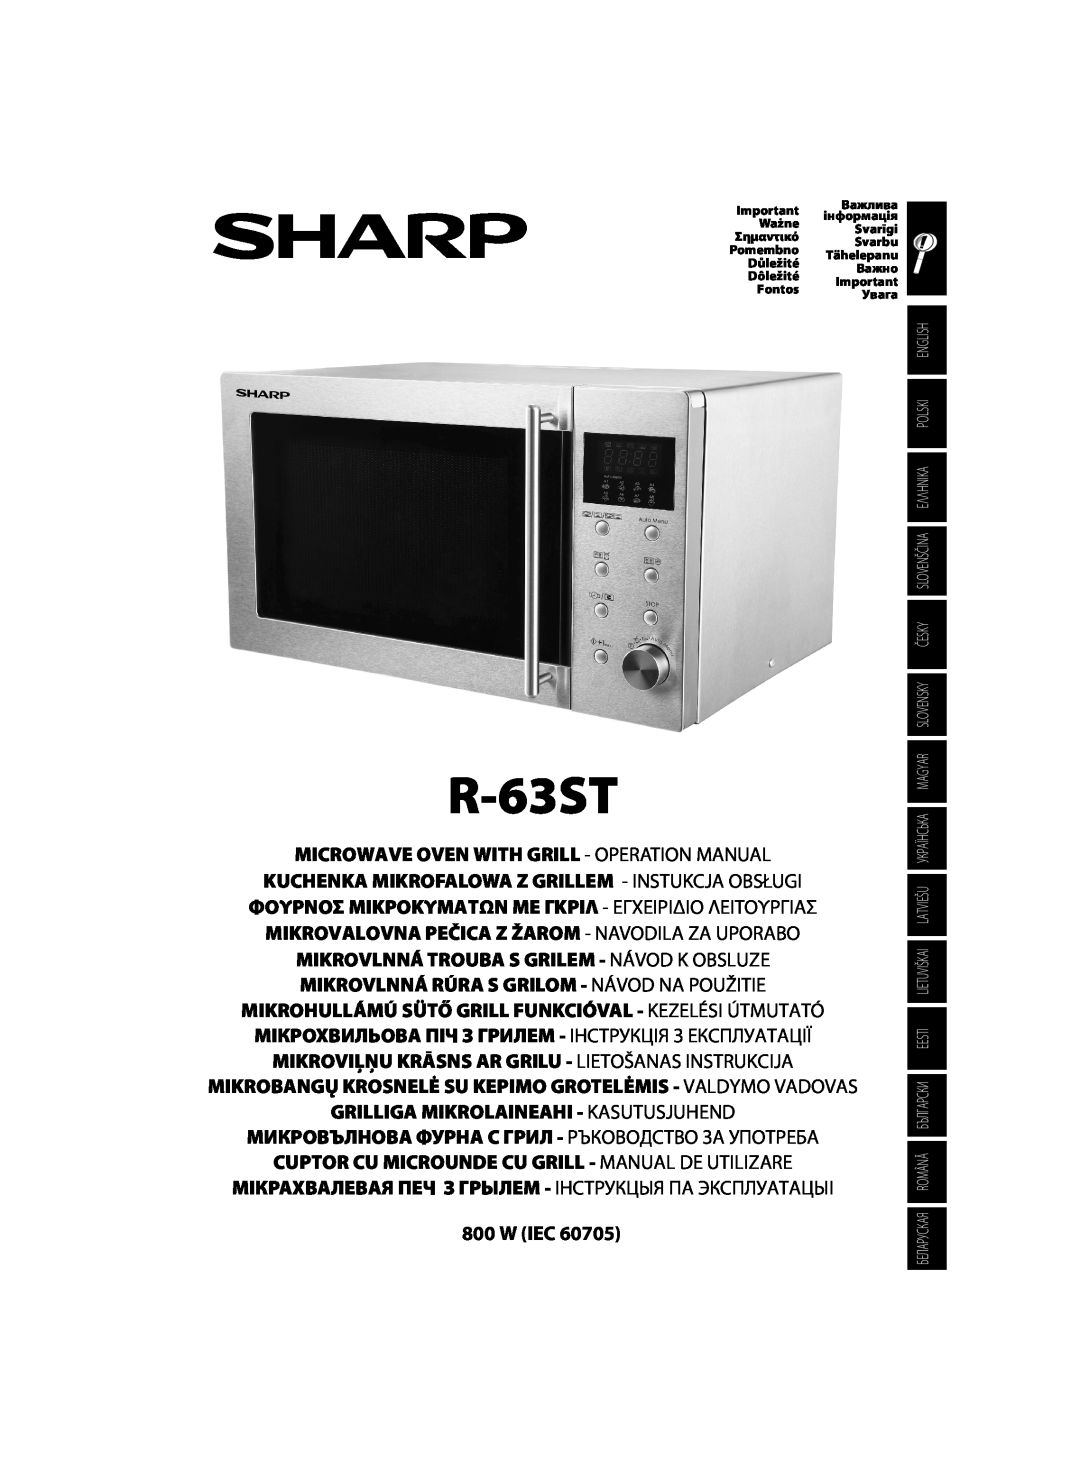 Sharp R-63ST operation manual Microwave Oven With Grill - Operation Manual, W Iec 